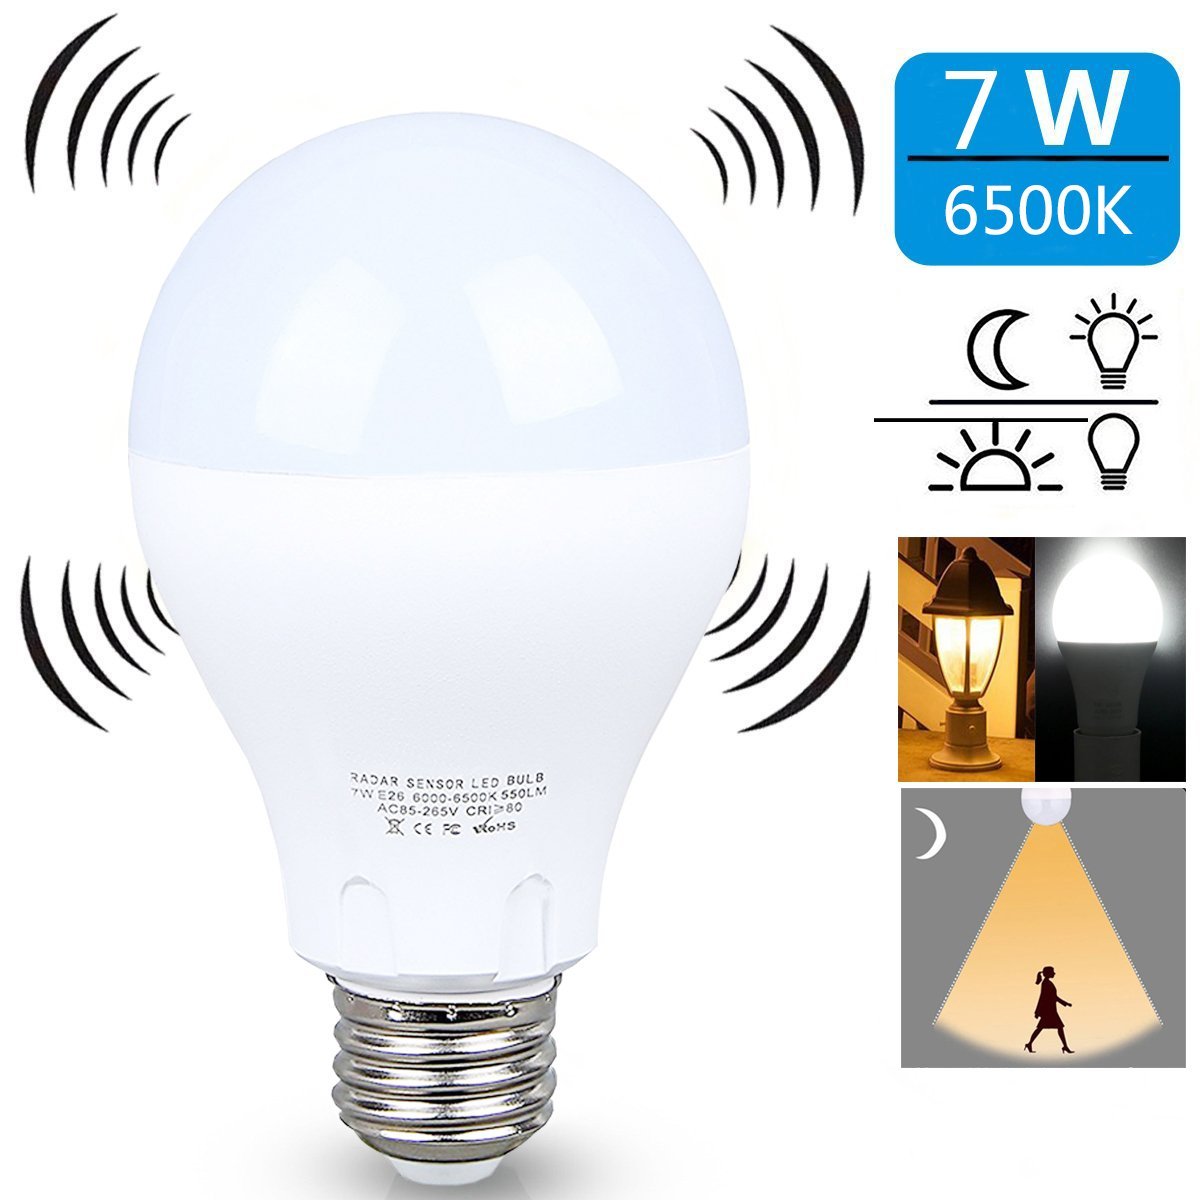 4W 7W 9W E27 Automatic On/Off Microwave Motion Sensor LED Light Bulb for Indoor Corridor Hallway Garage Staircase